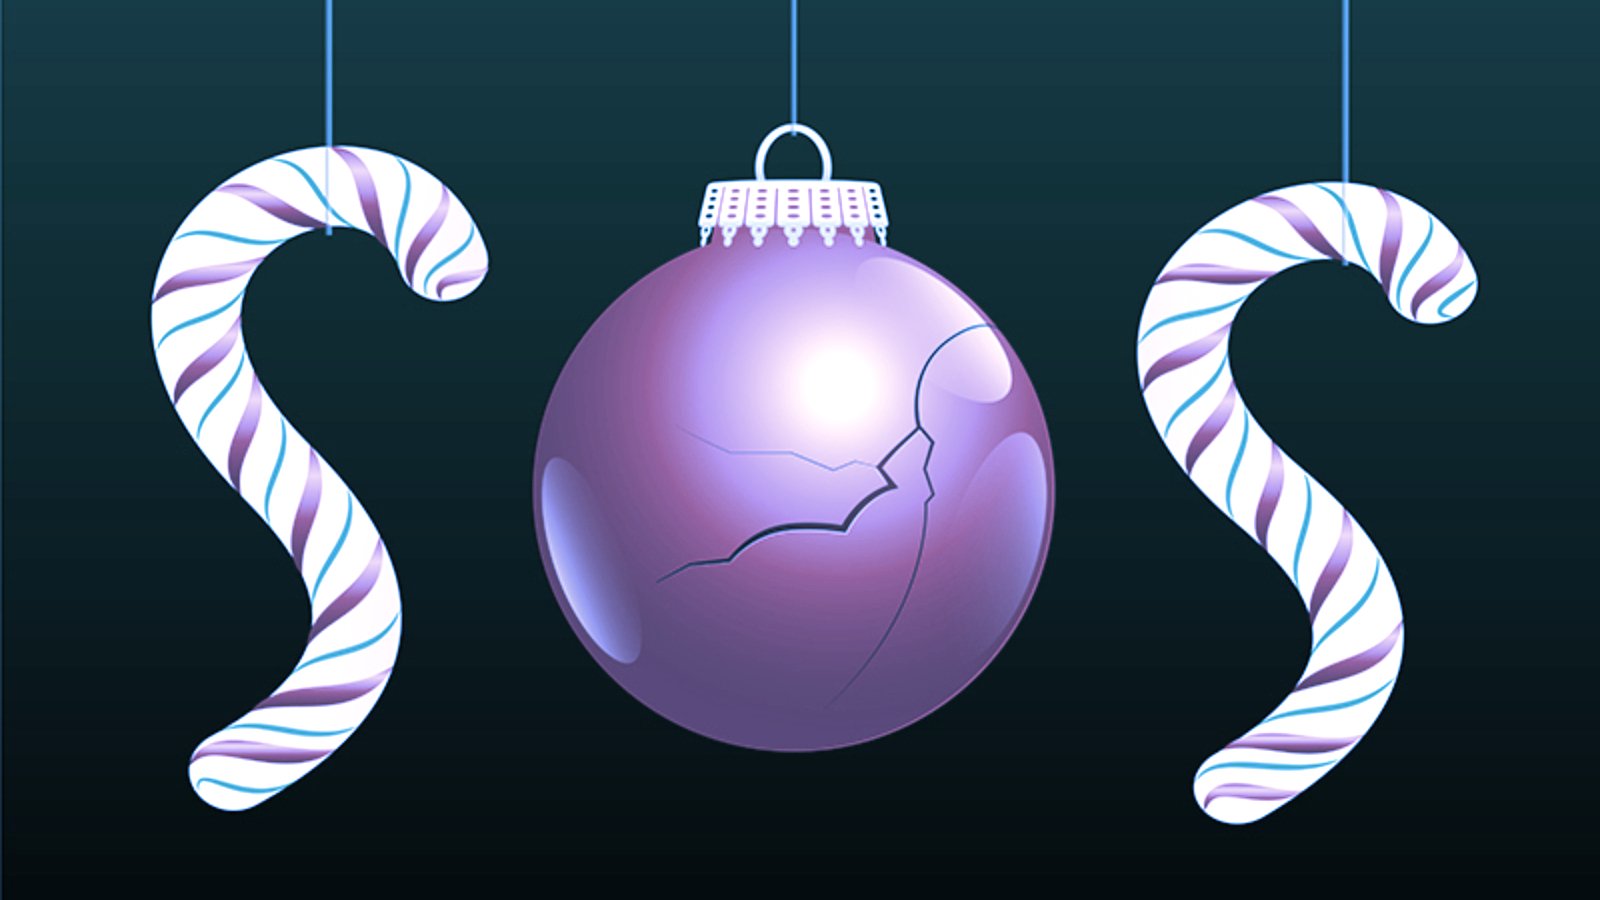 A damaged christmas ball and two candy canes make the word SOS. Image: Shutterstock